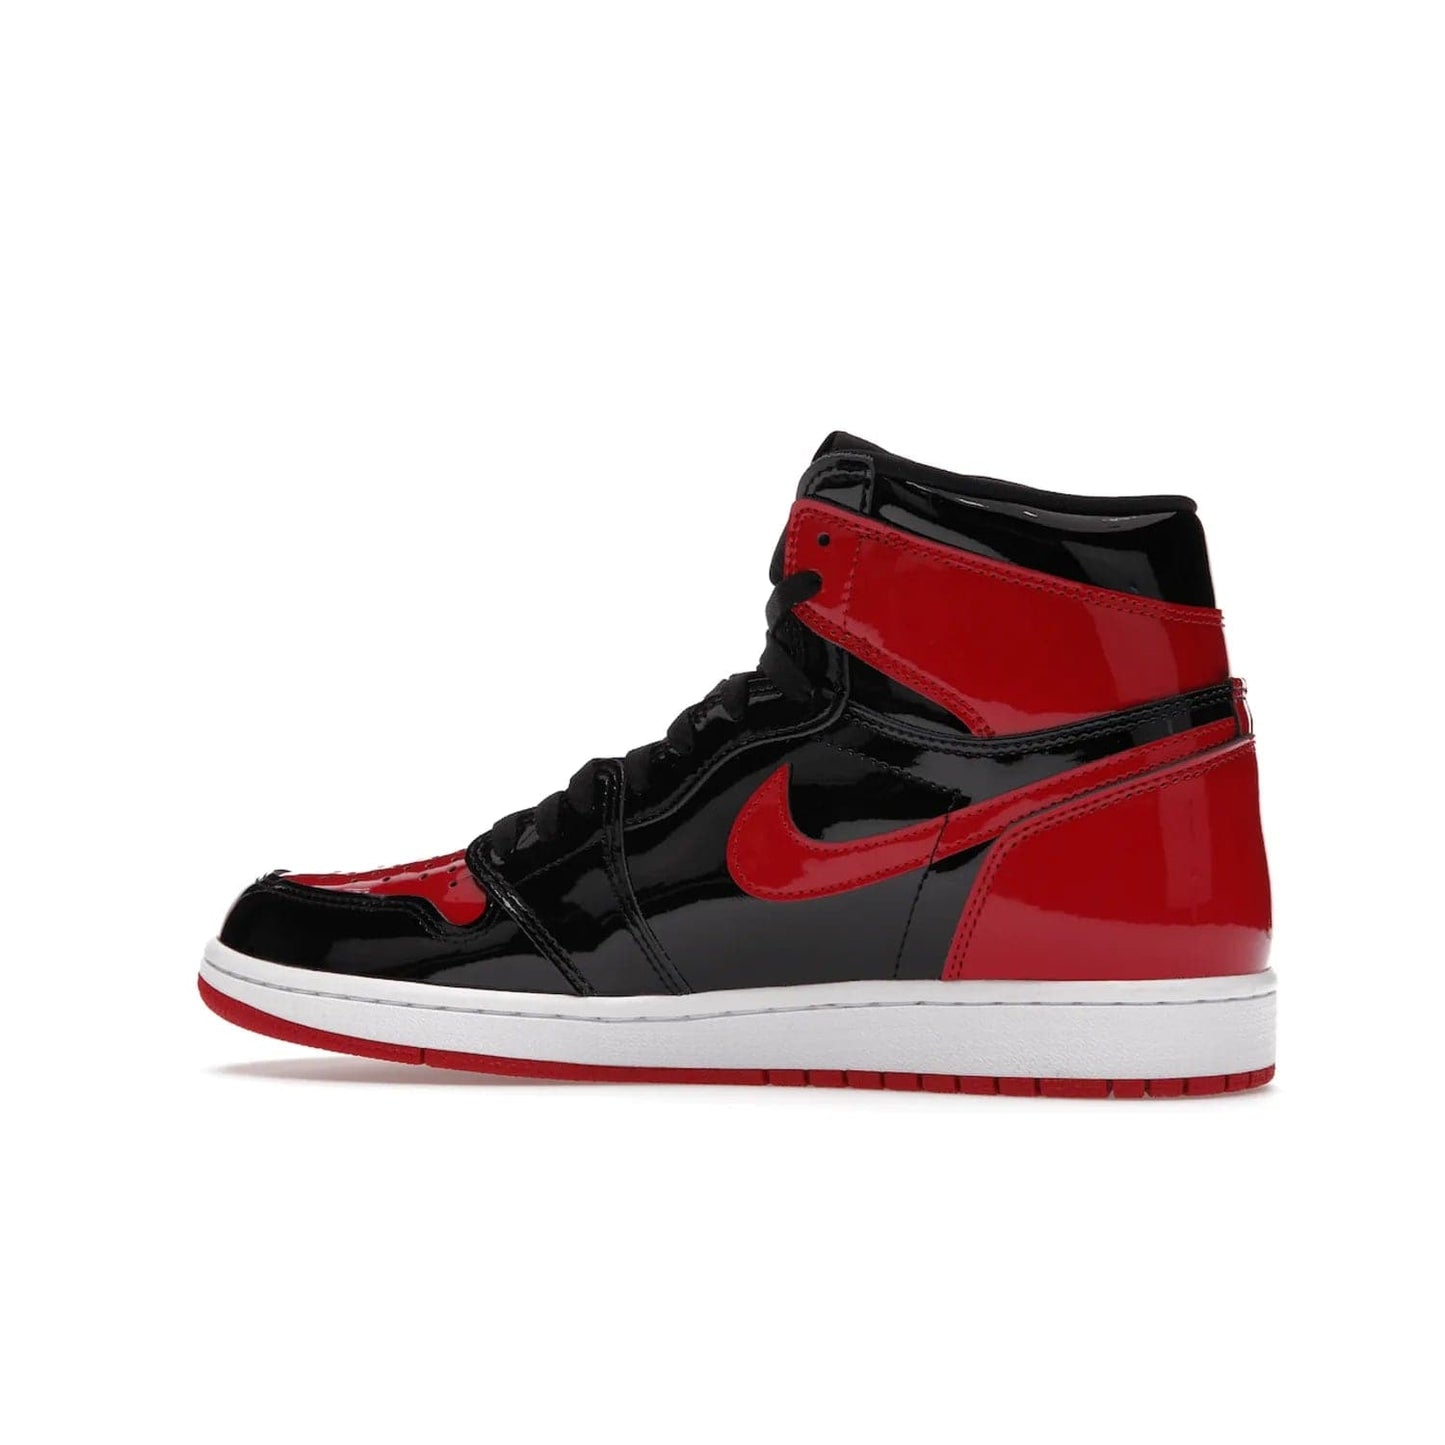 Jordan 1 Retro High OG Patent Bred - Image 21 - Only at www.BallersClubKickz.com - Introducing Air Jordan 1 Retro High OG Patent Bred - sleek patent leather upper, signature weaved Nike Air tongue and classic Wings logo on collar. Red and white sole complete signature look. Releasing December 2021 - perfect retro edition for holidays.